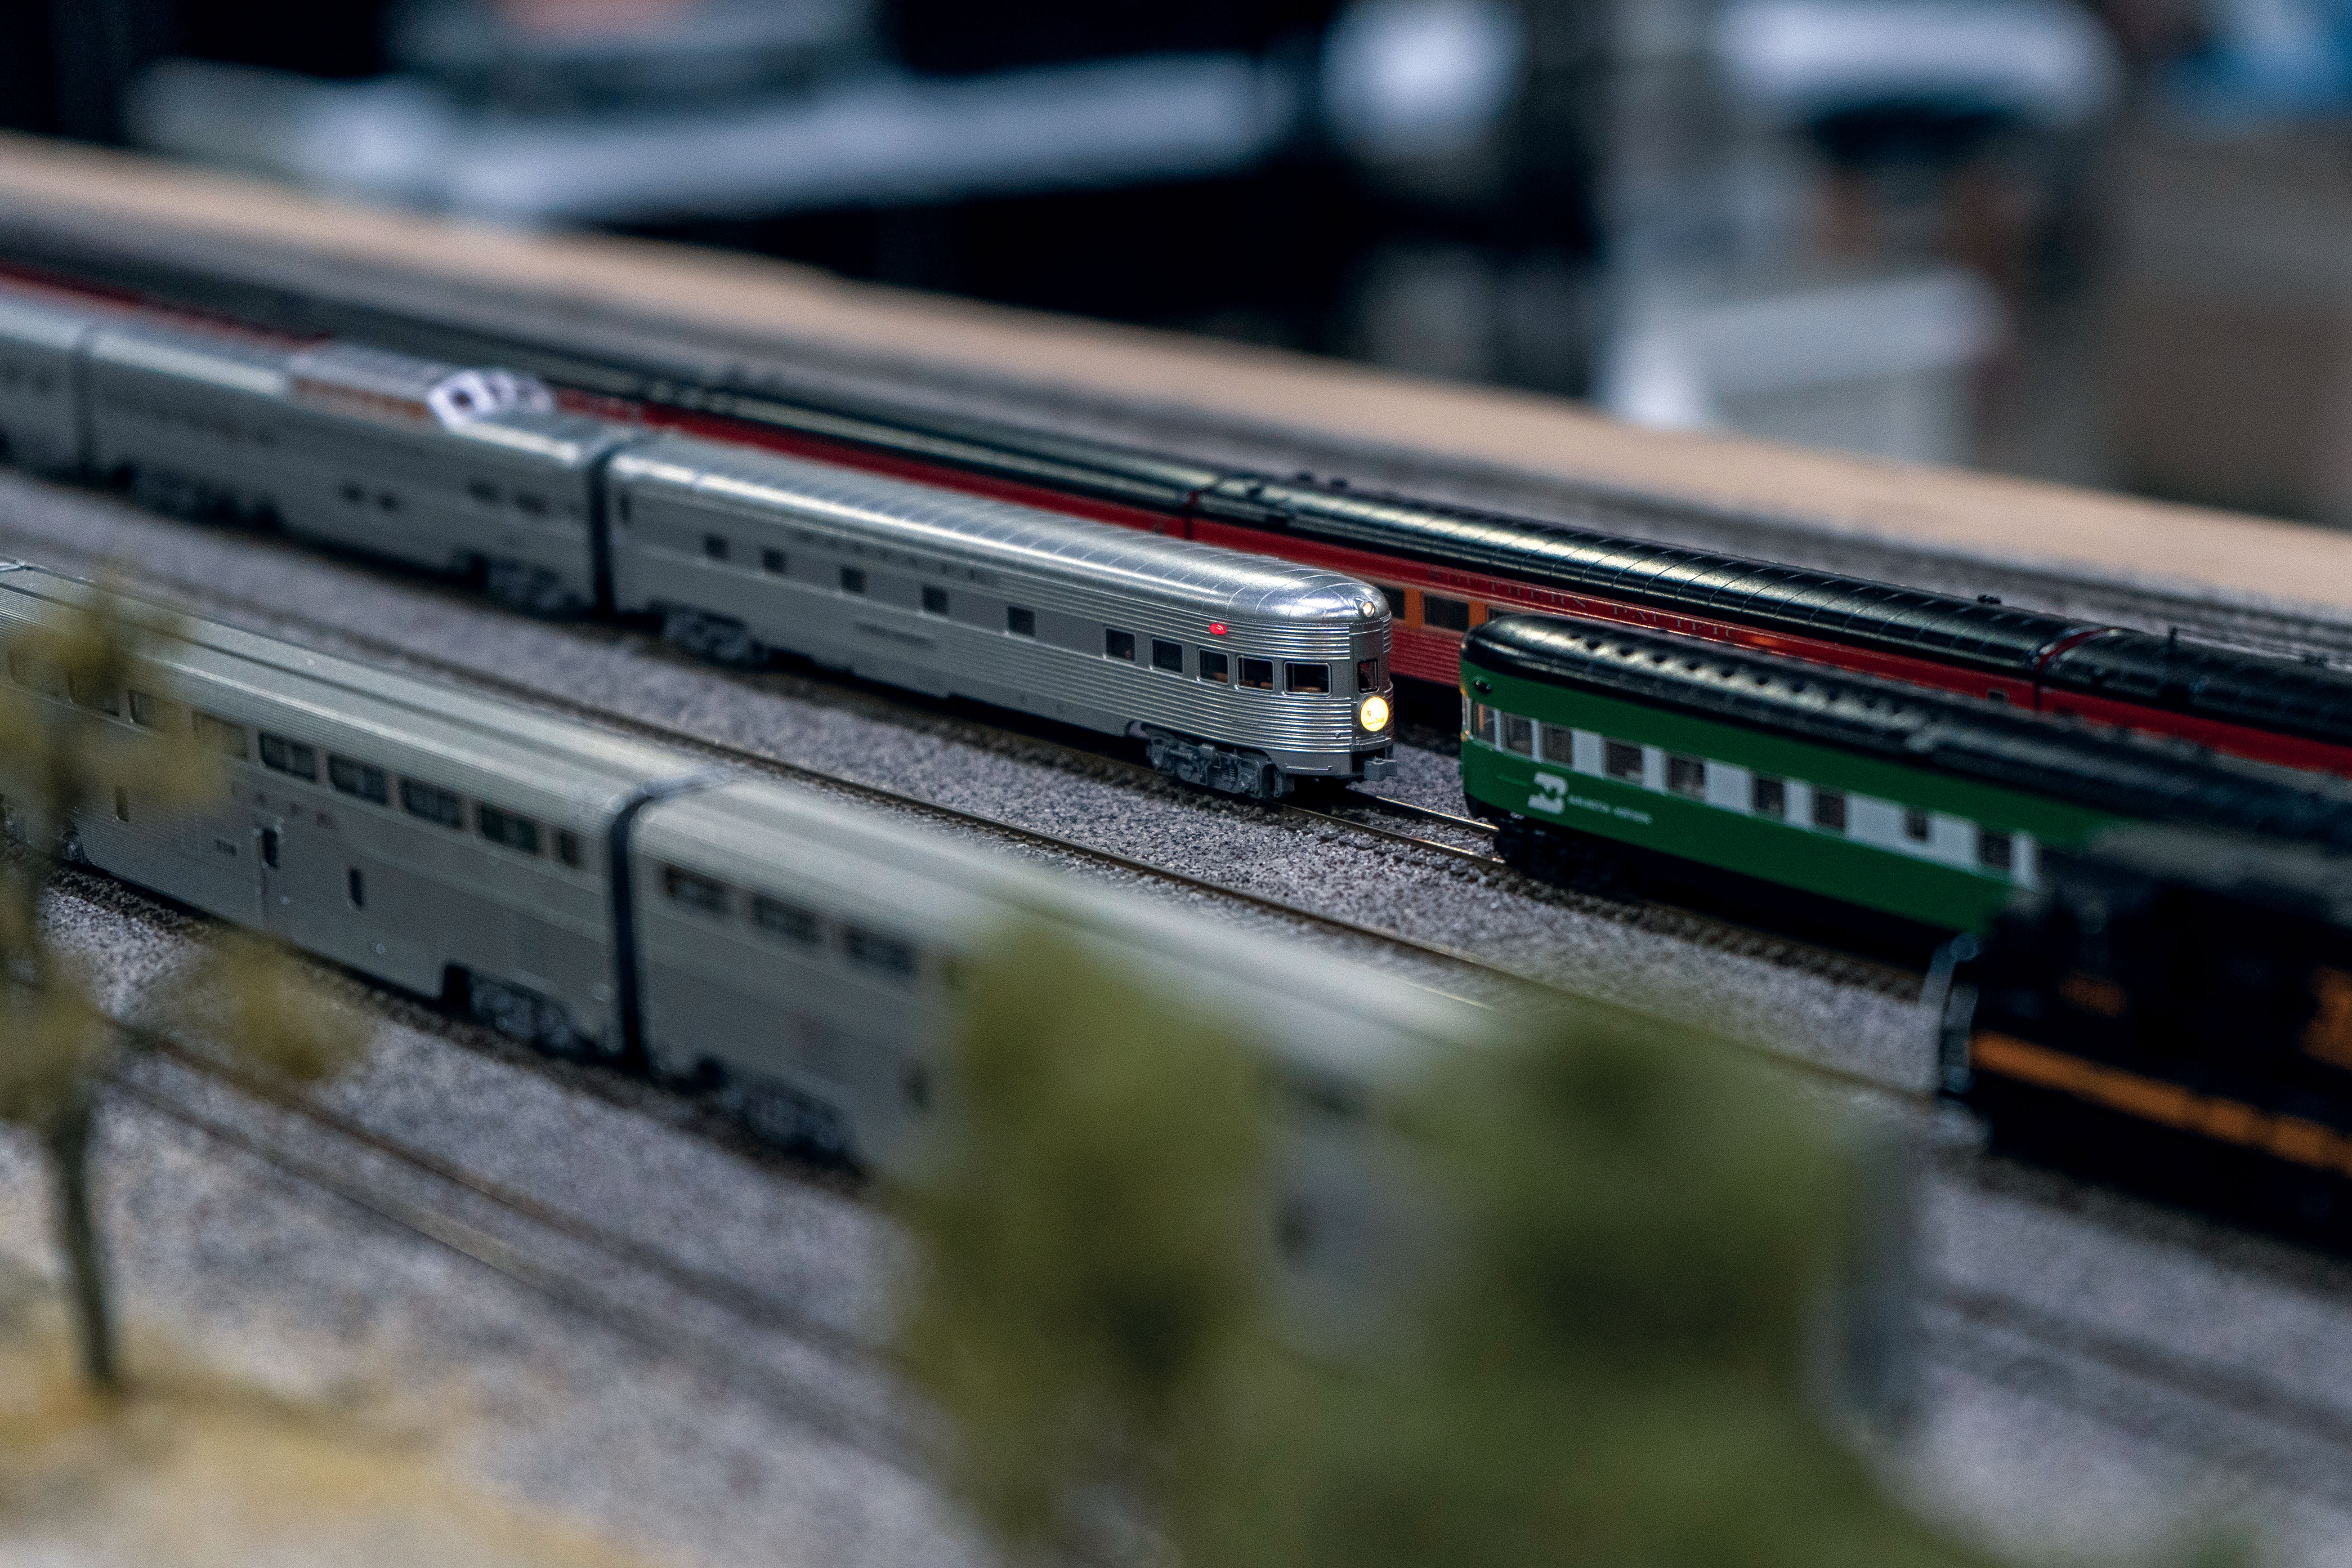 model trains were a new addition